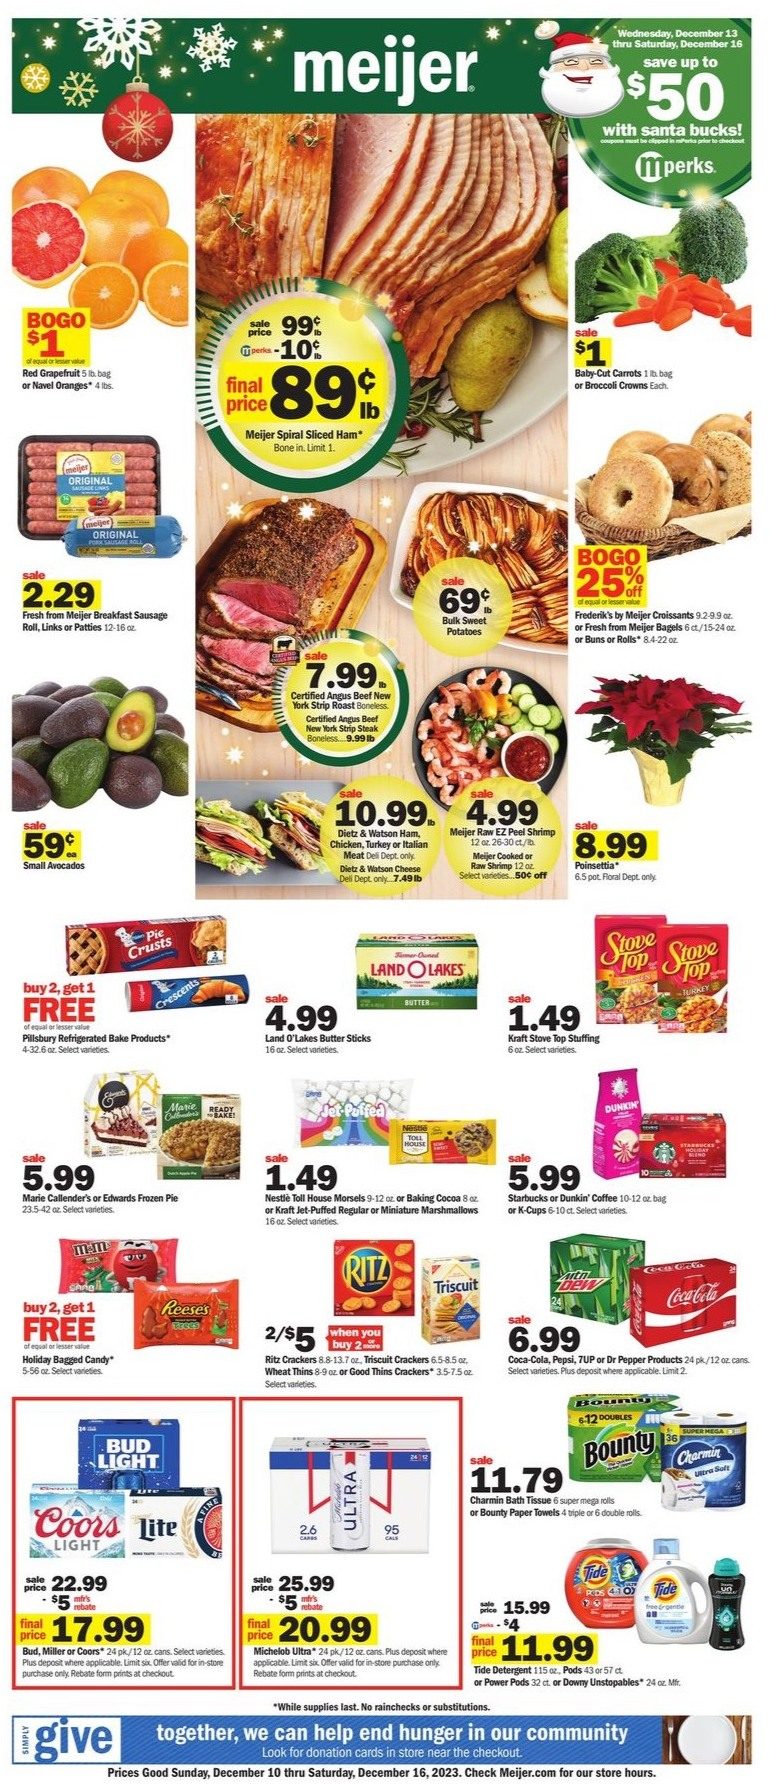 Meijer Weekly Ad 10th – 16th December 2023 Page 1